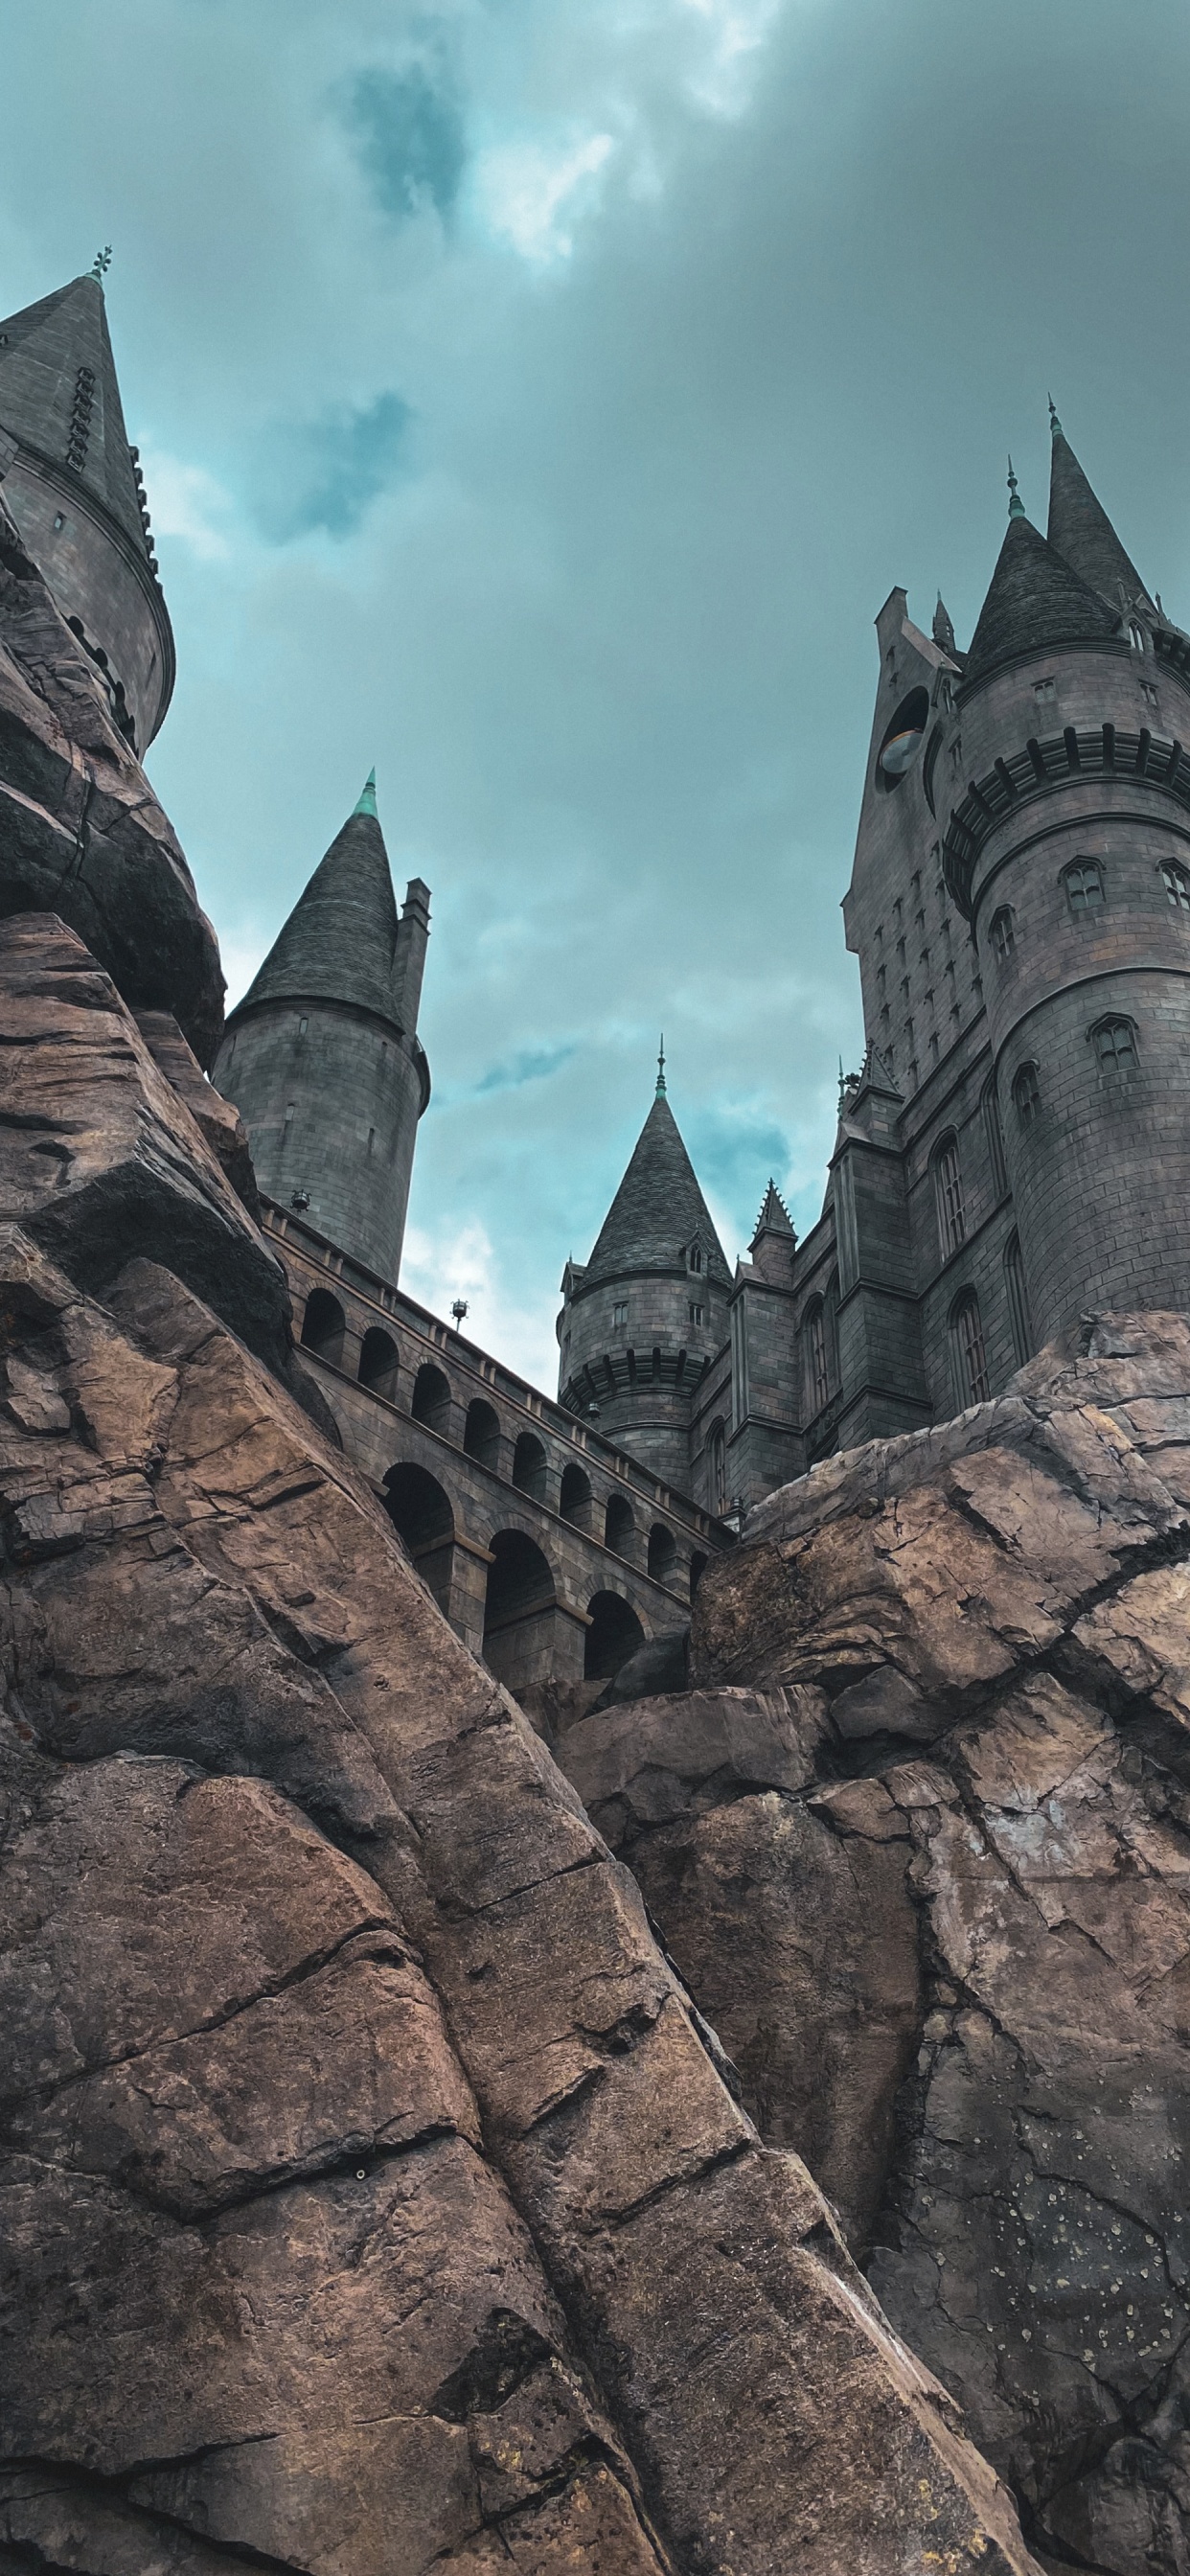 Hogwarts, Scorpius Hyperion Malfoy, Harry Potter, Wizarding World, Slytherin House. Wallpaper in 1242x2688 Resolution